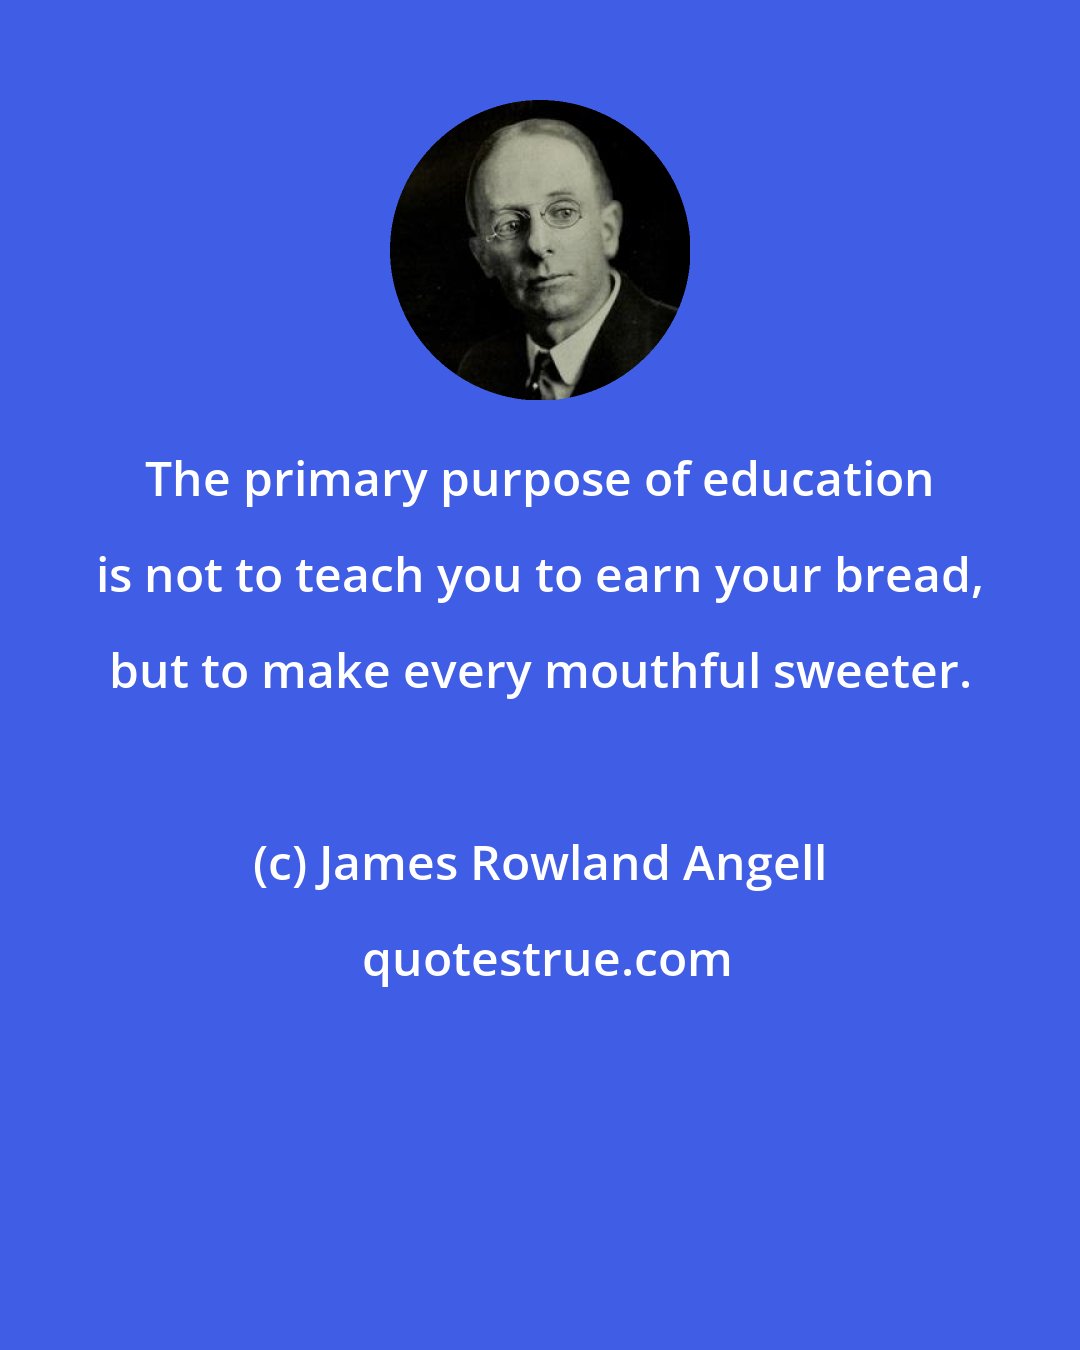 James Rowland Angell: The primary purpose of education is not to teach you to earn your bread, but to make every mouthful sweeter.